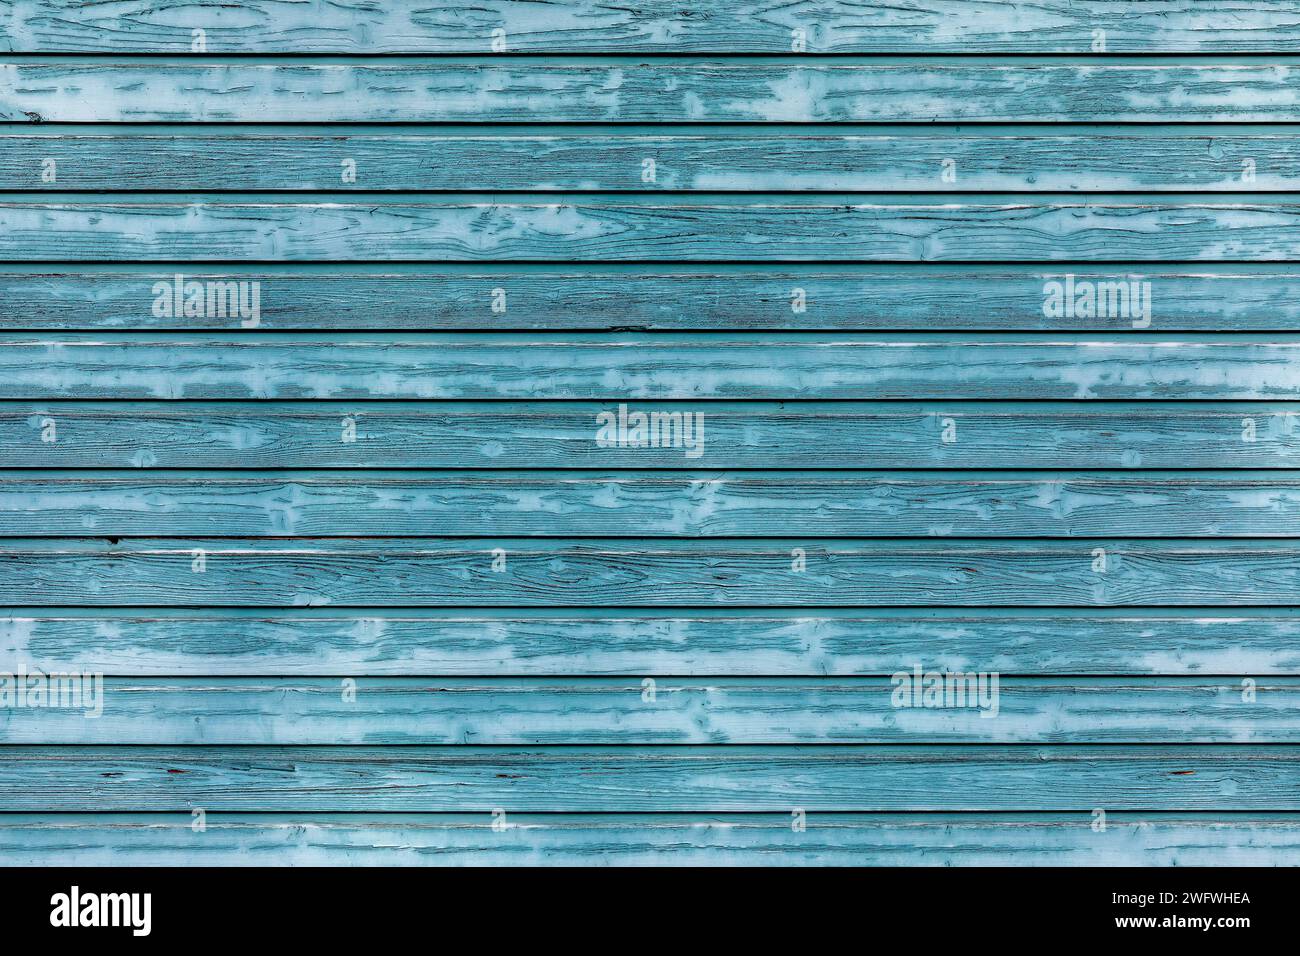 Rustic Turquoise Photostudio Barn Wall Texture for Farmhouse Backgrounds and Vintage Design, Background Stock Photo